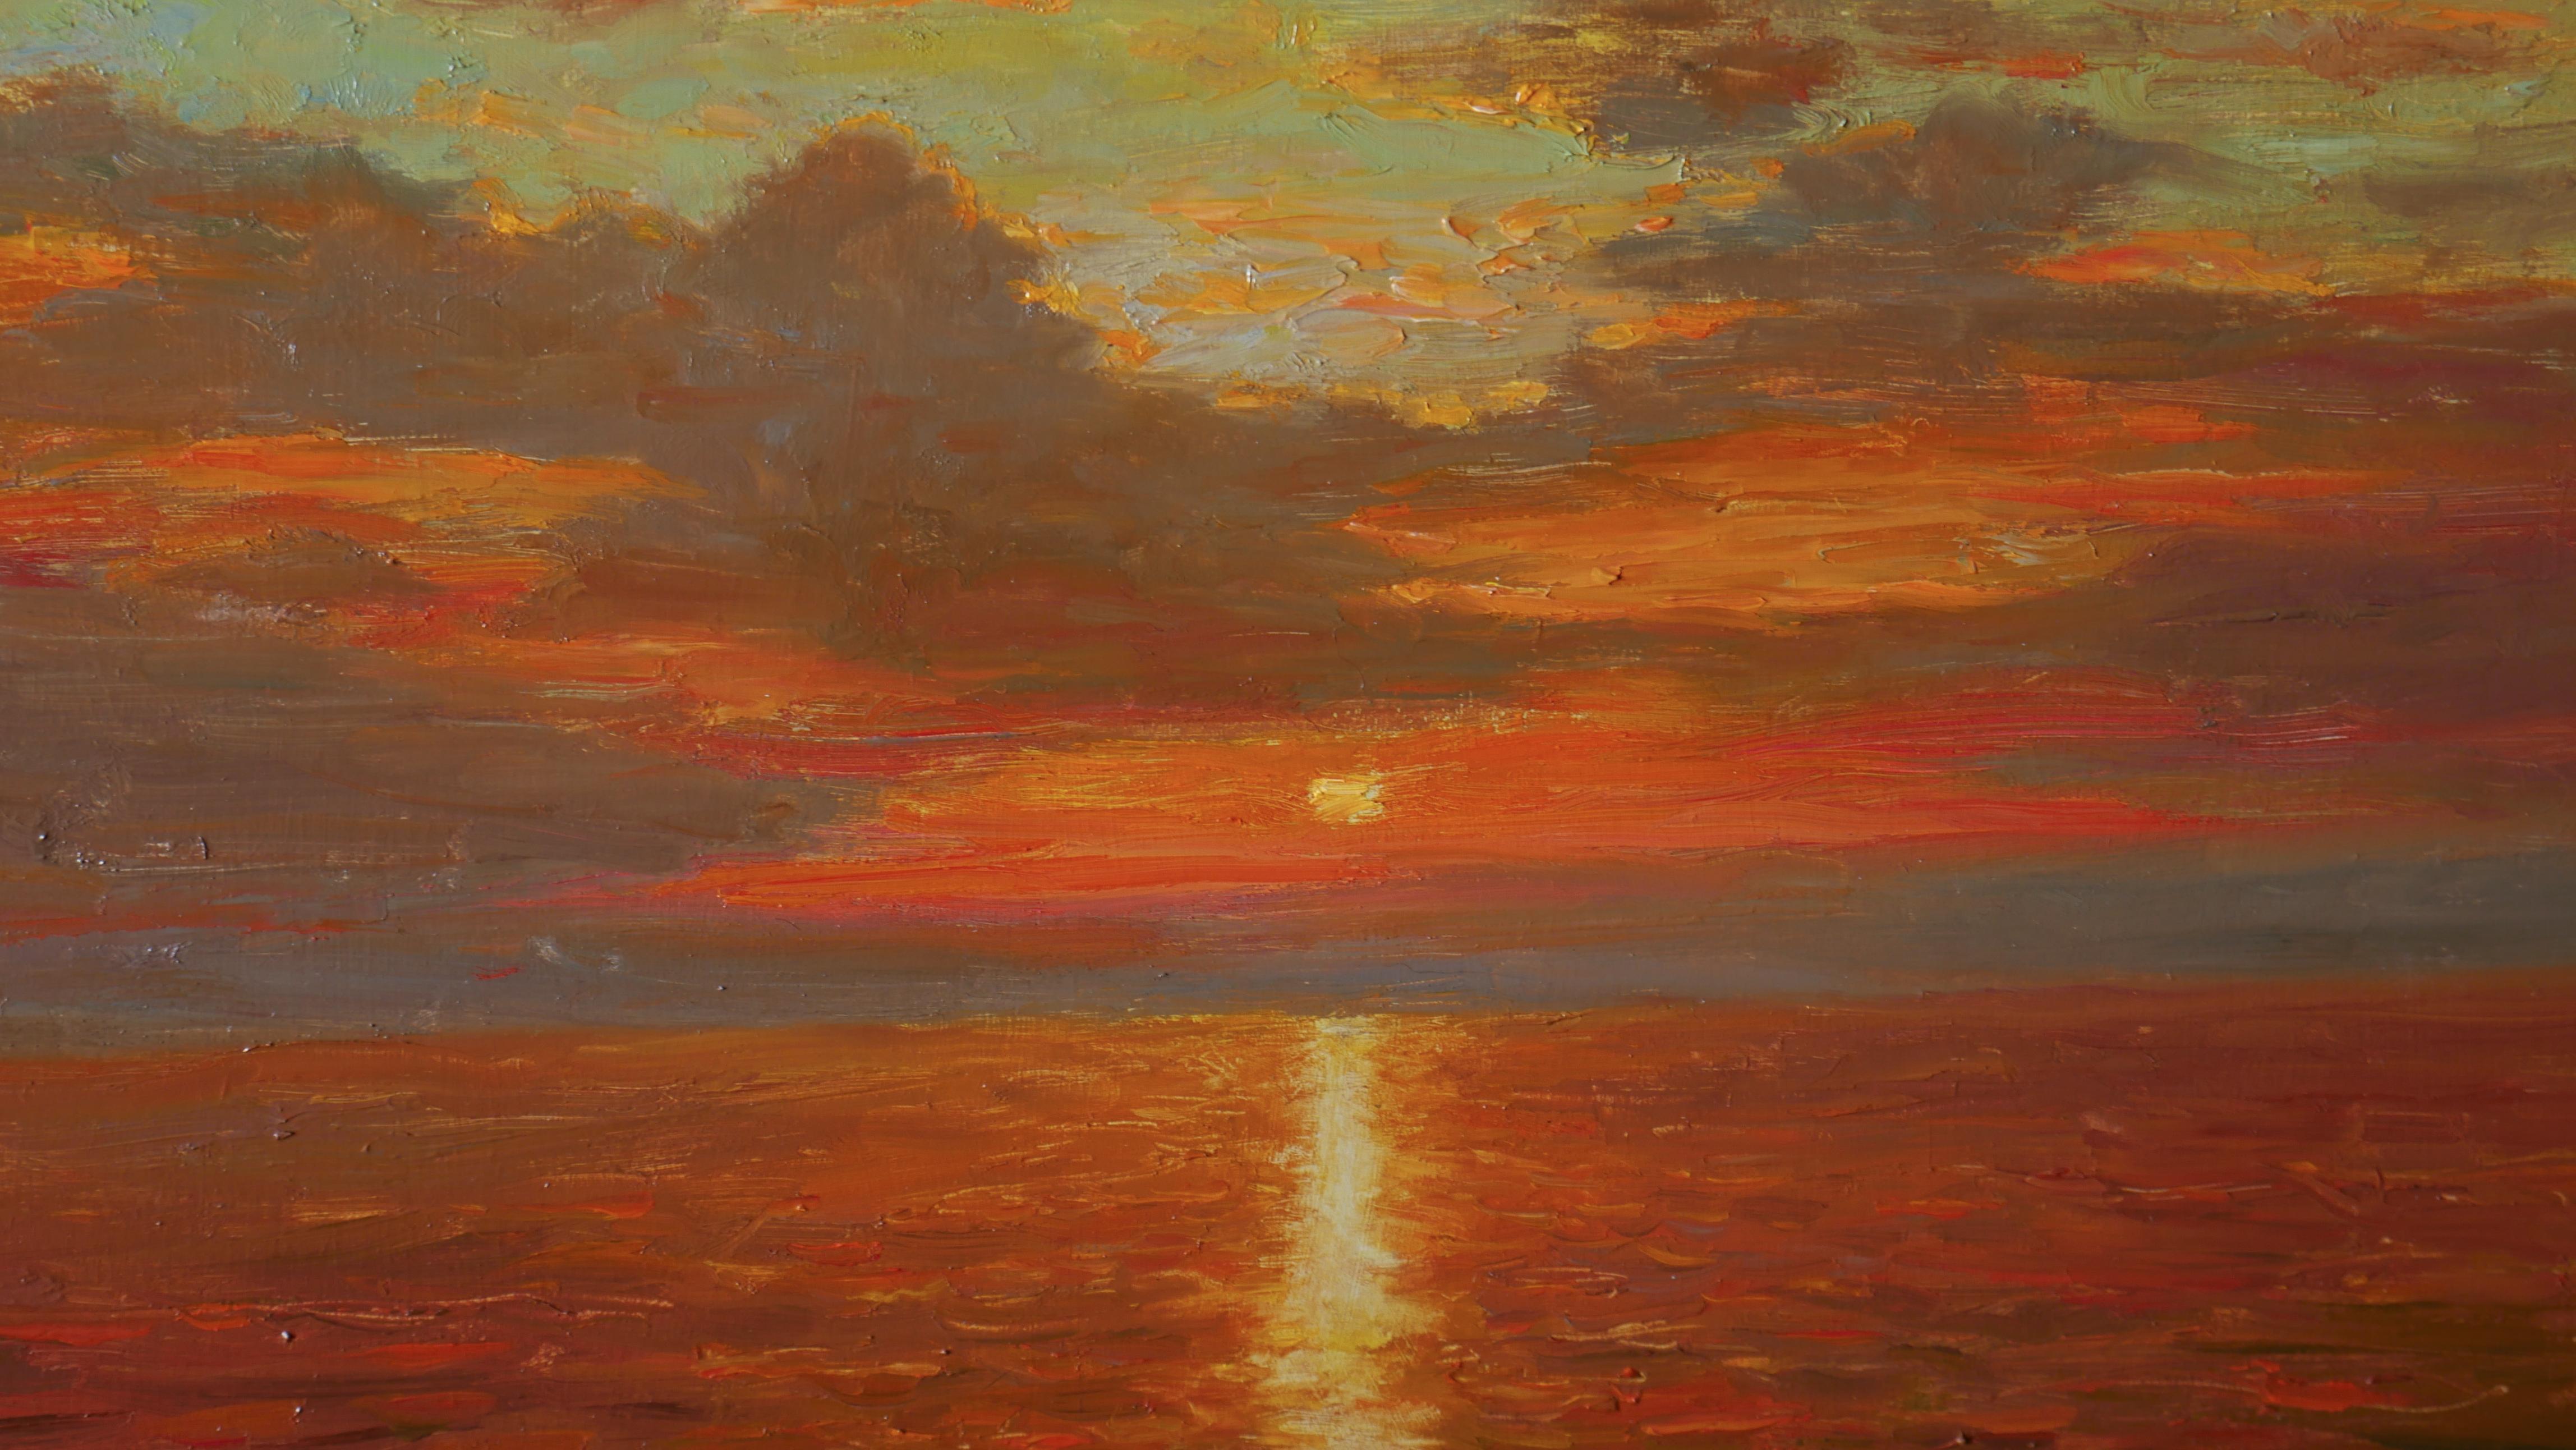 The evening painting with sunset over the sea is a wonderful wall decoration of any interior. The artwork is bright and it's full of positive energy! The artist masterfully captured the evenings sky, clouds, waves and the amazing reflection of the